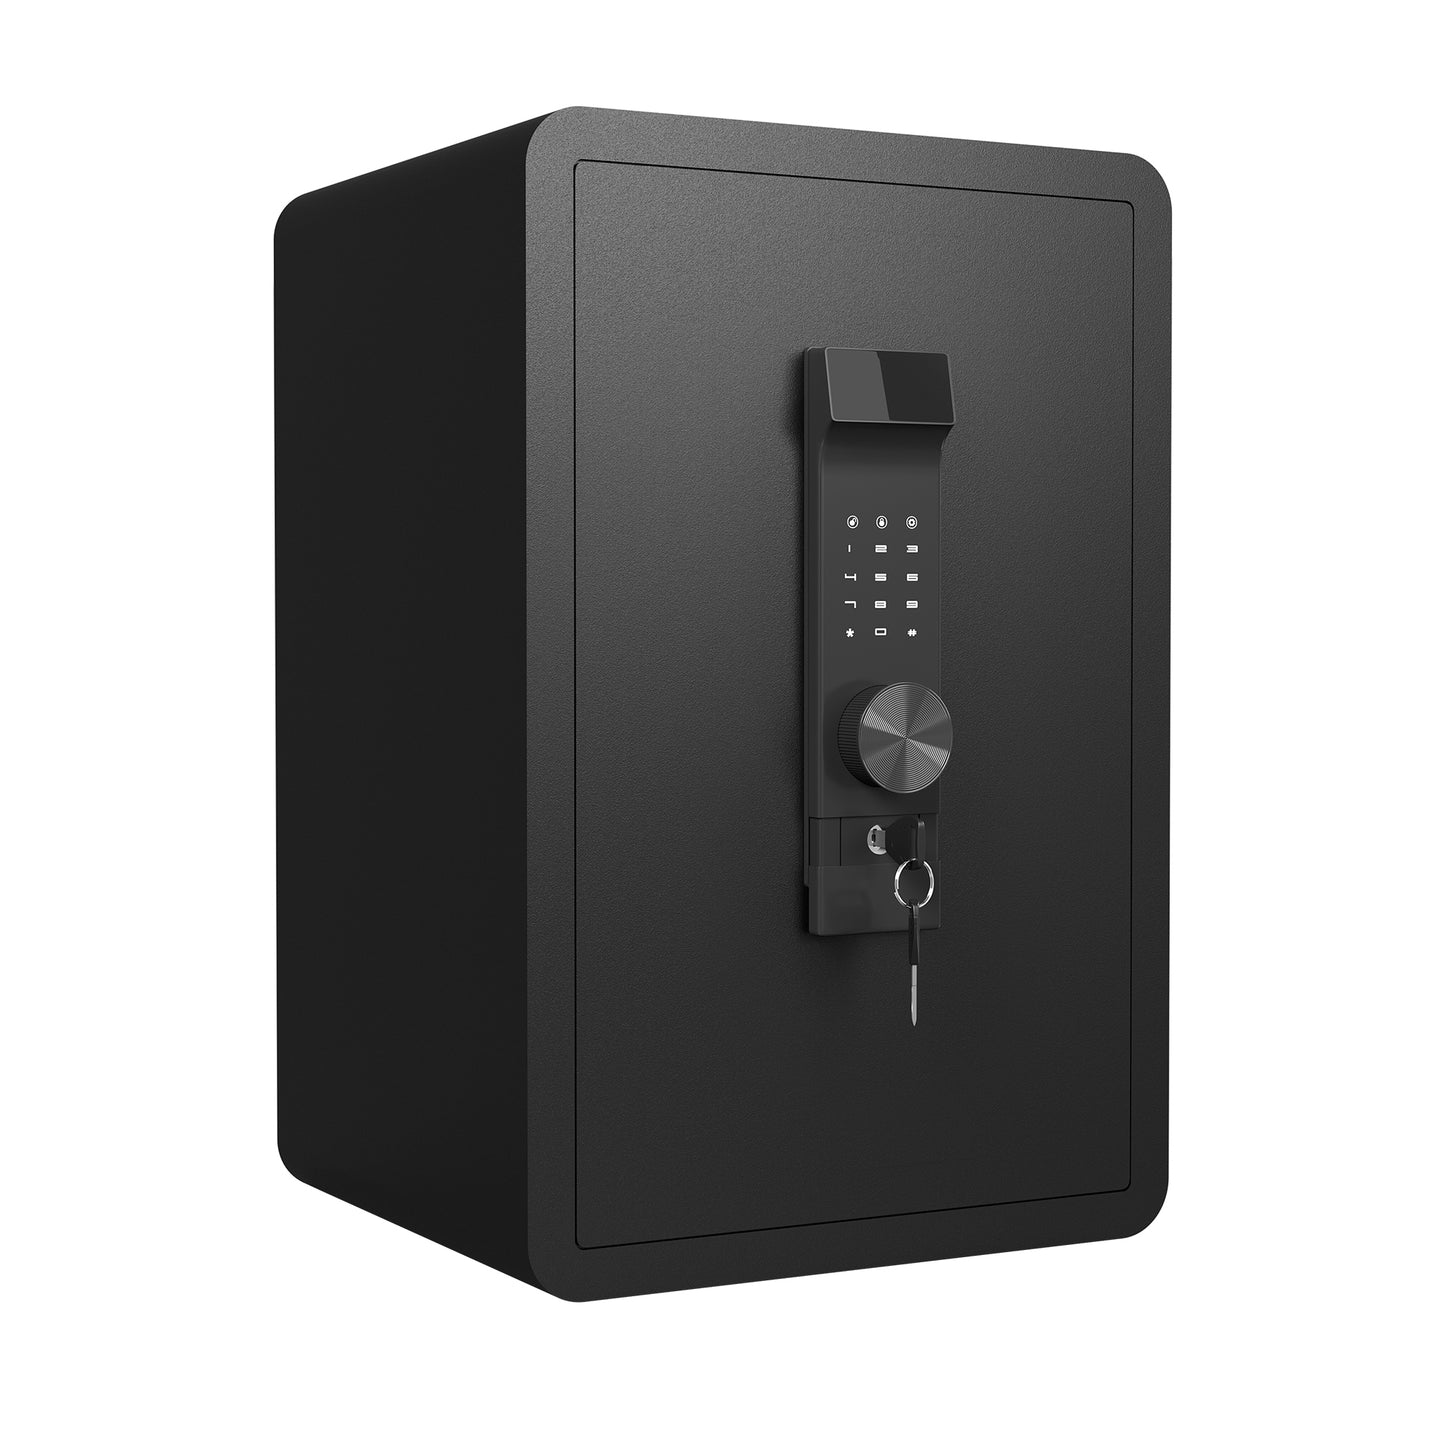 Large Security Safe with Advanced Locking System